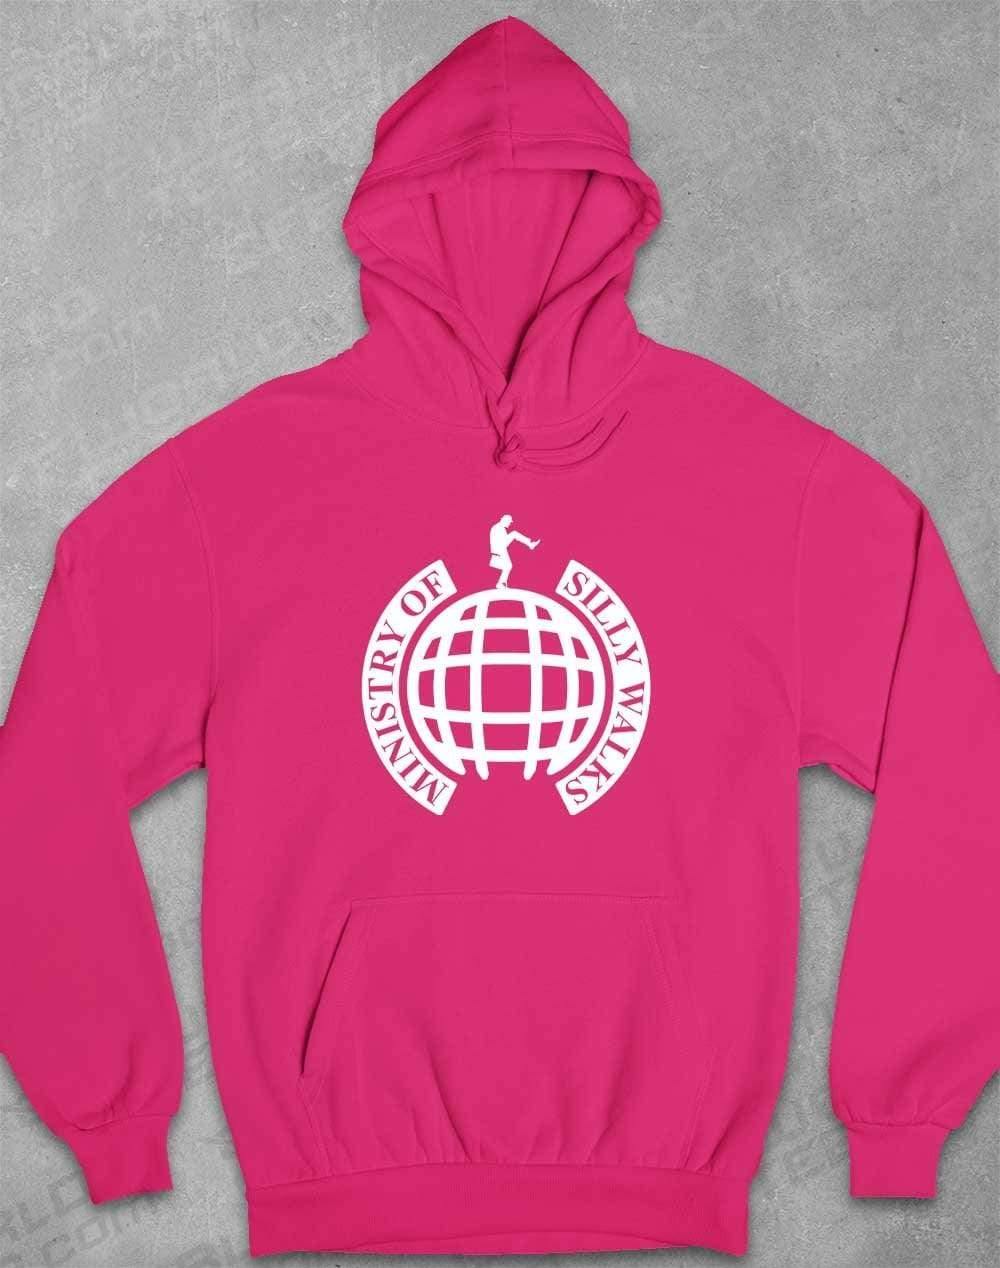 Ministry of Silly Walks Hoodie XS / Hot Pink  - Off World Tees